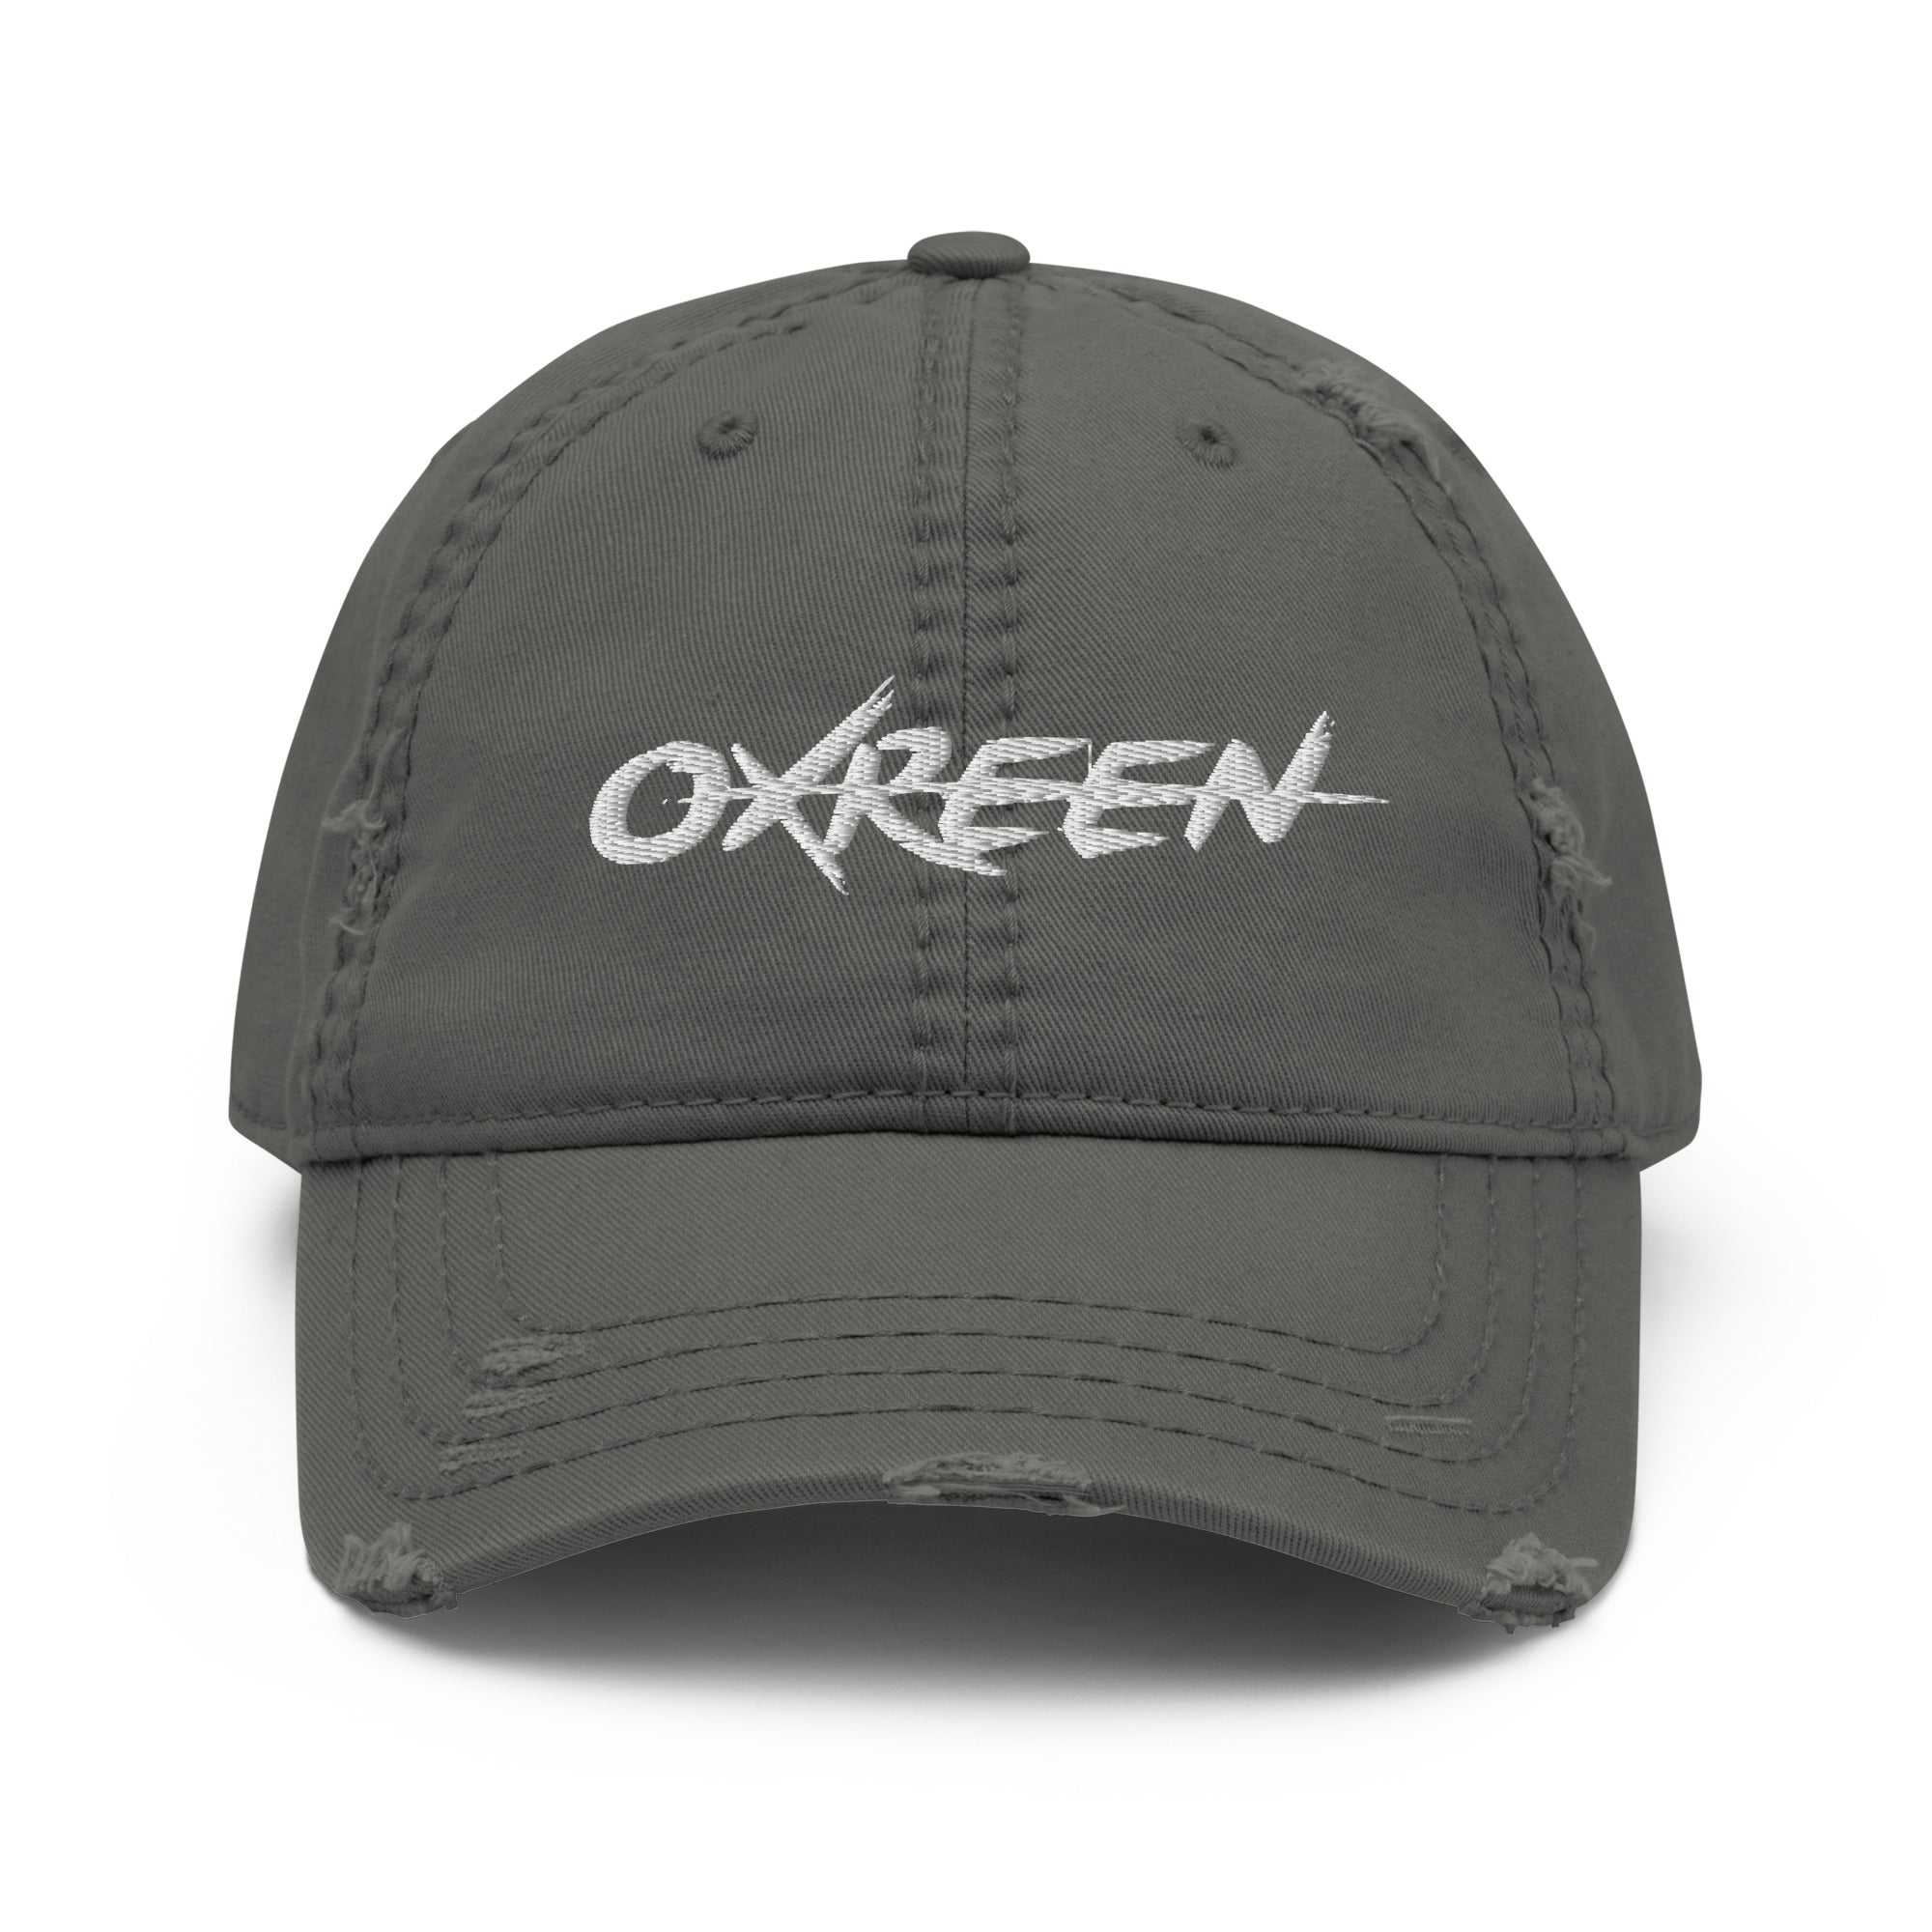 Distressed Dad Hat with Velcro Strap